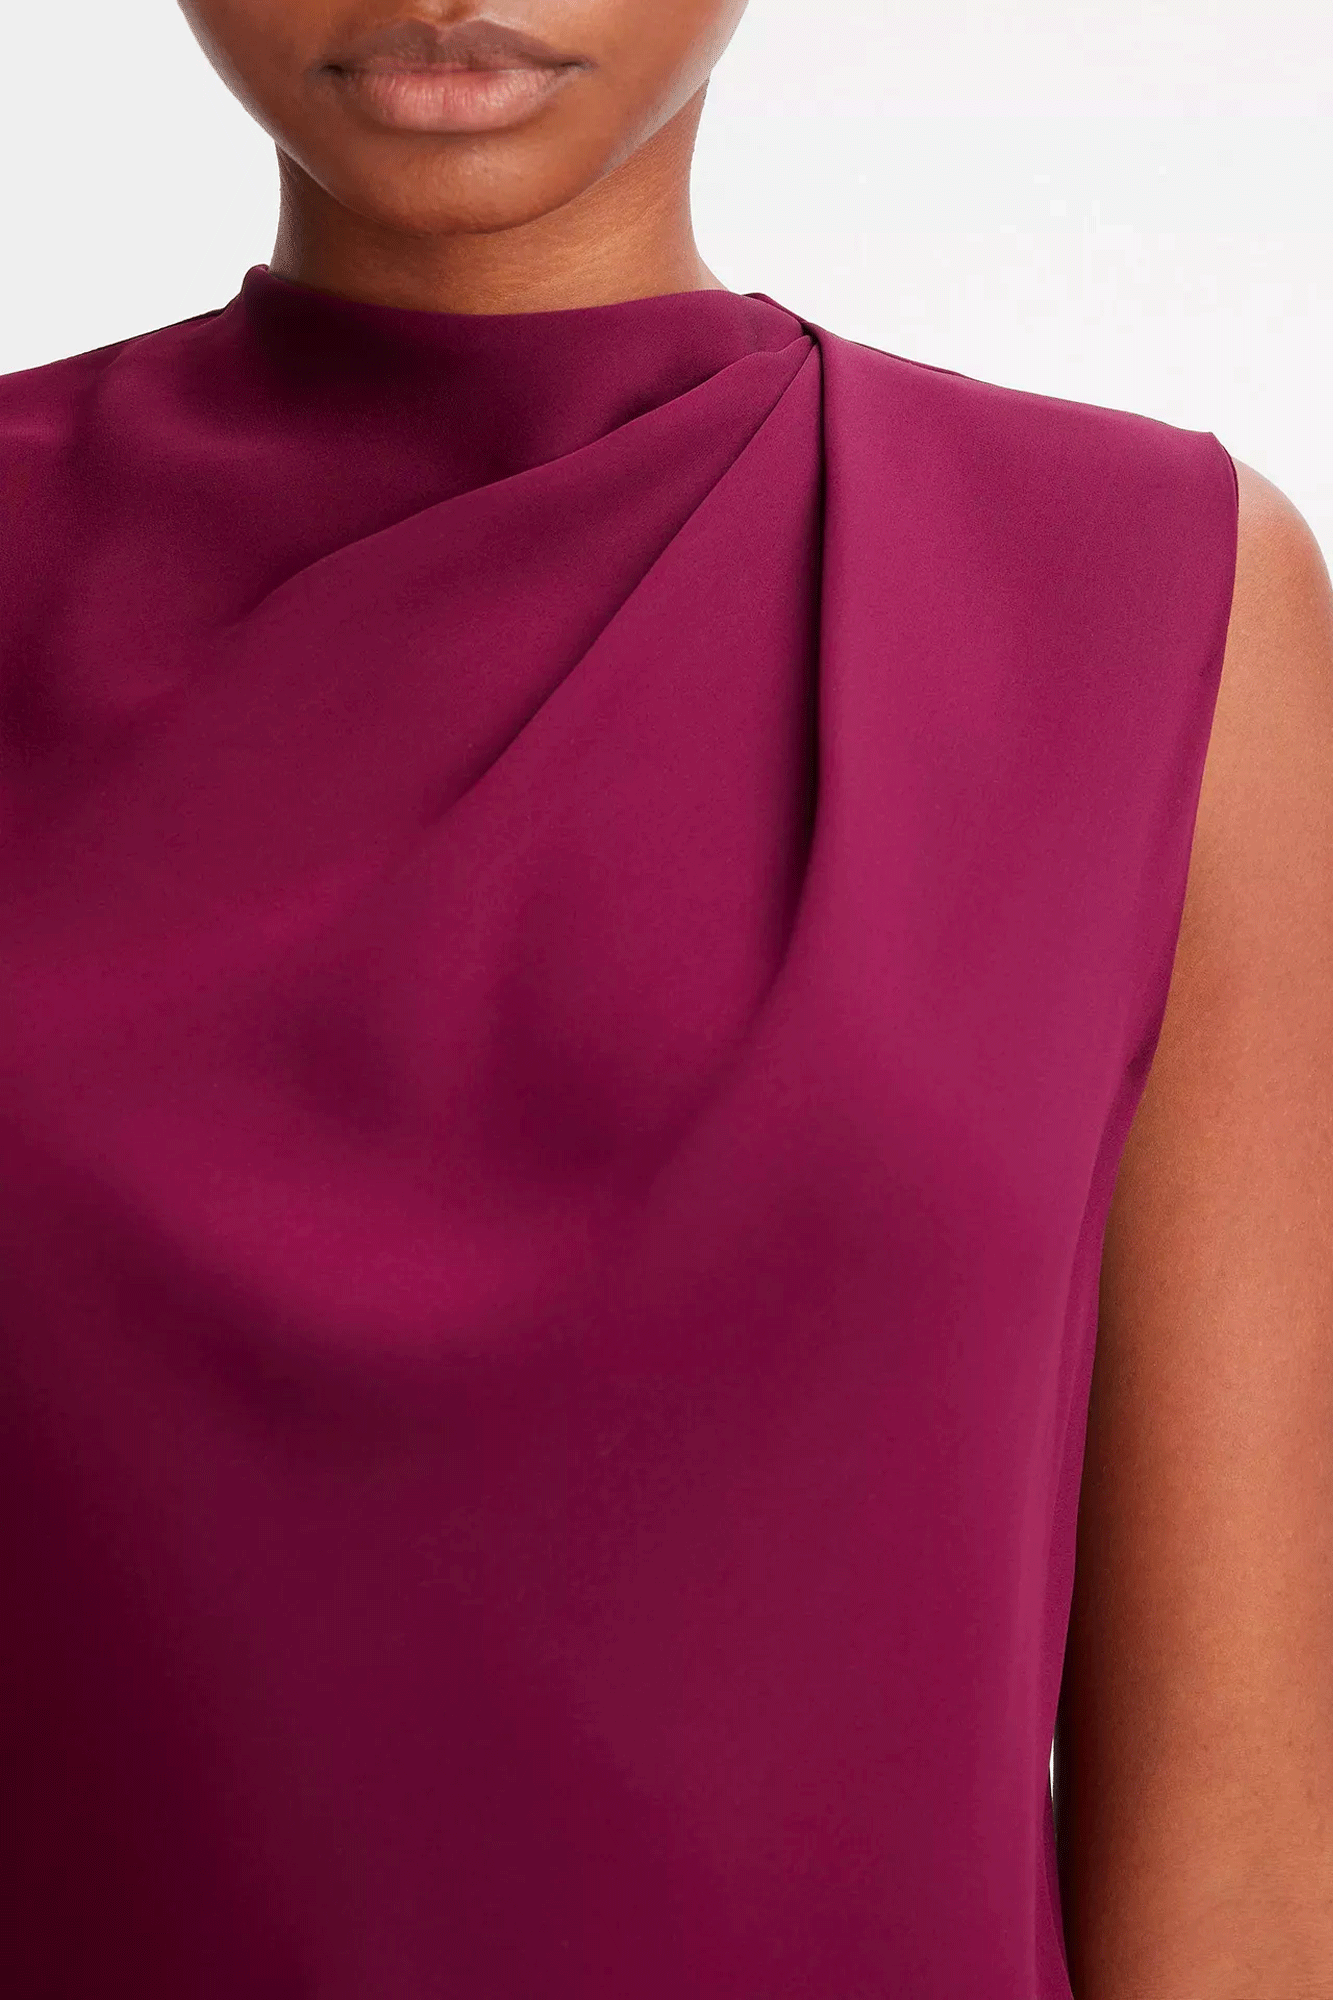 Our Draped Cascade Sleeveless Blouse adds an elegant touch to your outfit. Its lightly pleated shoulder creates a beautiful drape effect and is made from a stretch-silk crepe that moves with you. Perfect for tucking into trousers, skirts, or denim.